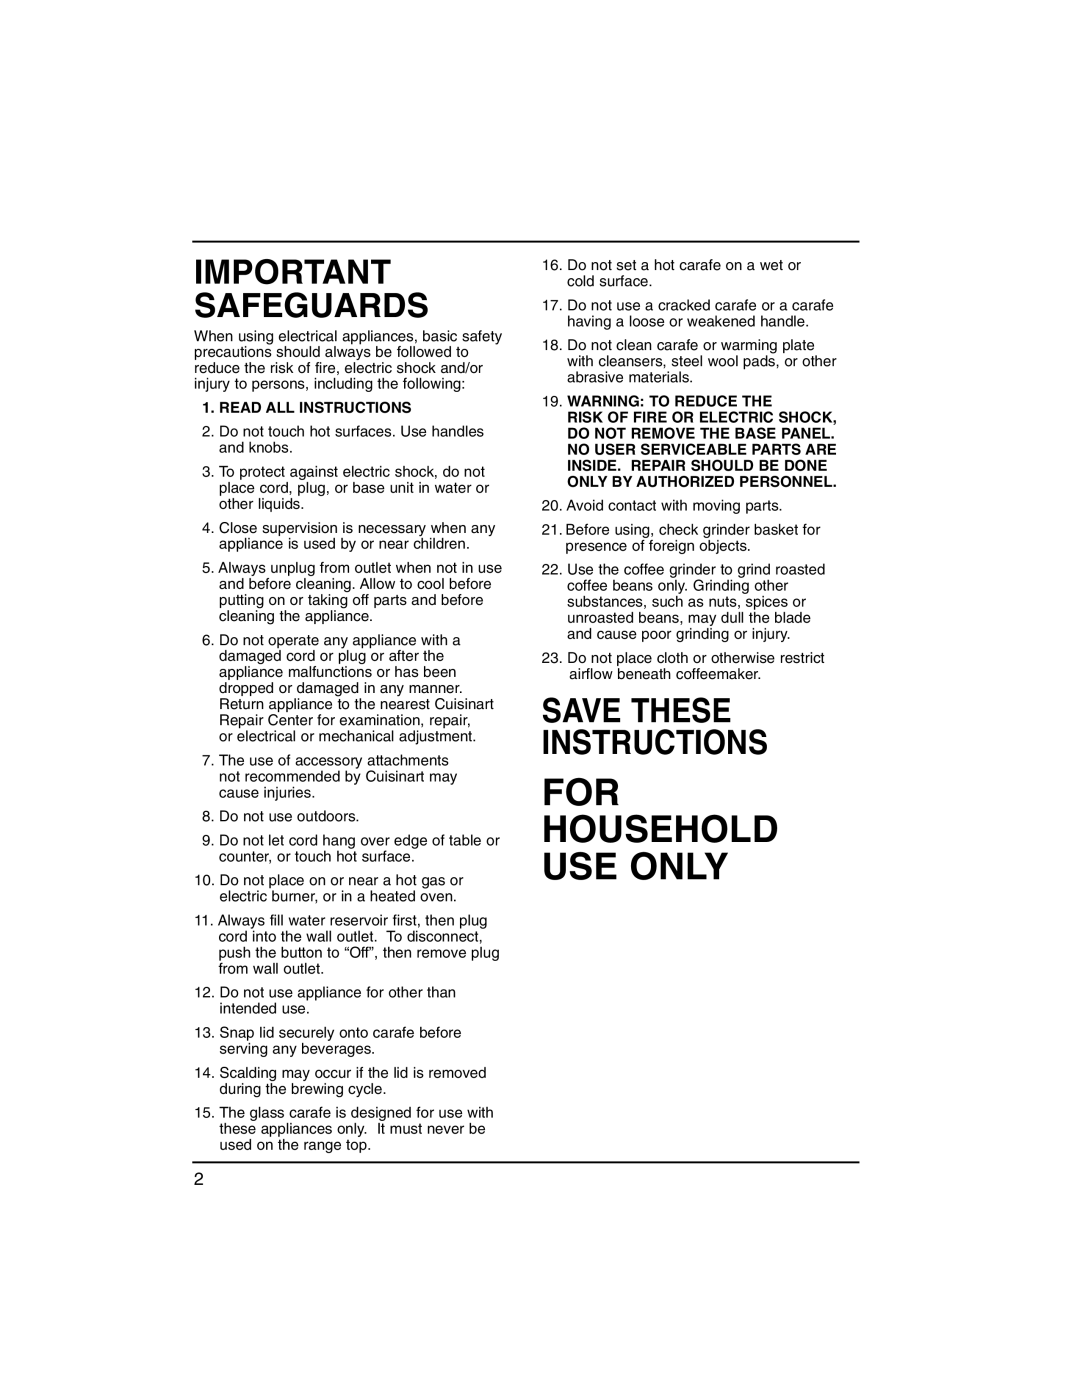 Cuisinart dgb300 manual For Household Use Only, Important Safeguards, Save These Instructions, Read All Instructions 